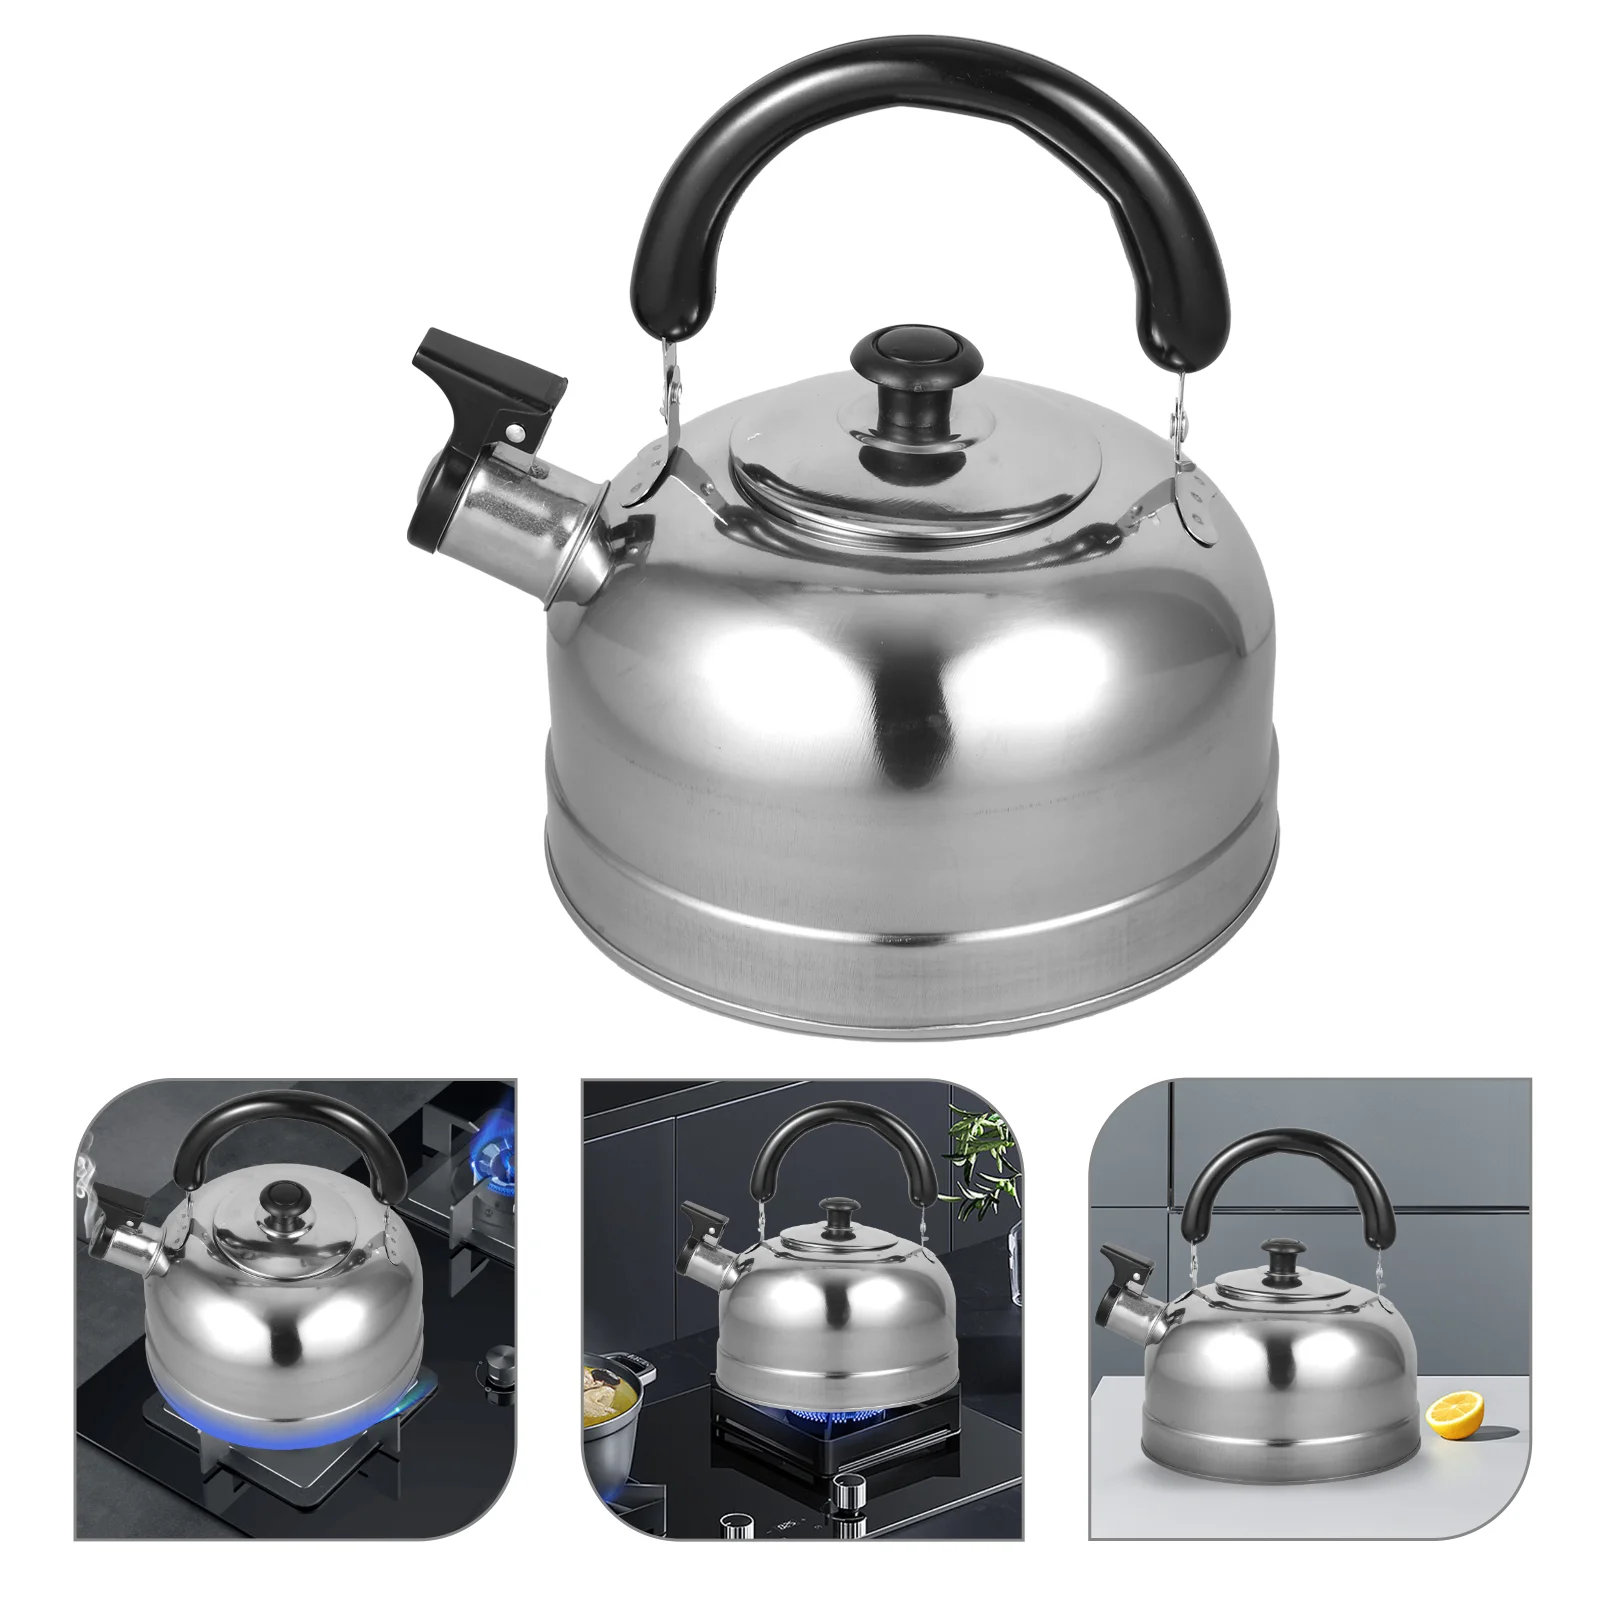 https://ae01.alicdn.com/kf/Sb8d3c0536182404a926d381ae94caa10X/Sound-Pot-Thicken-Water-Kettle-Stainless-Steel-Heating-Teakettle-Gas-Stove-Whistling-Electric-Range-Induction-Cooker.jpg